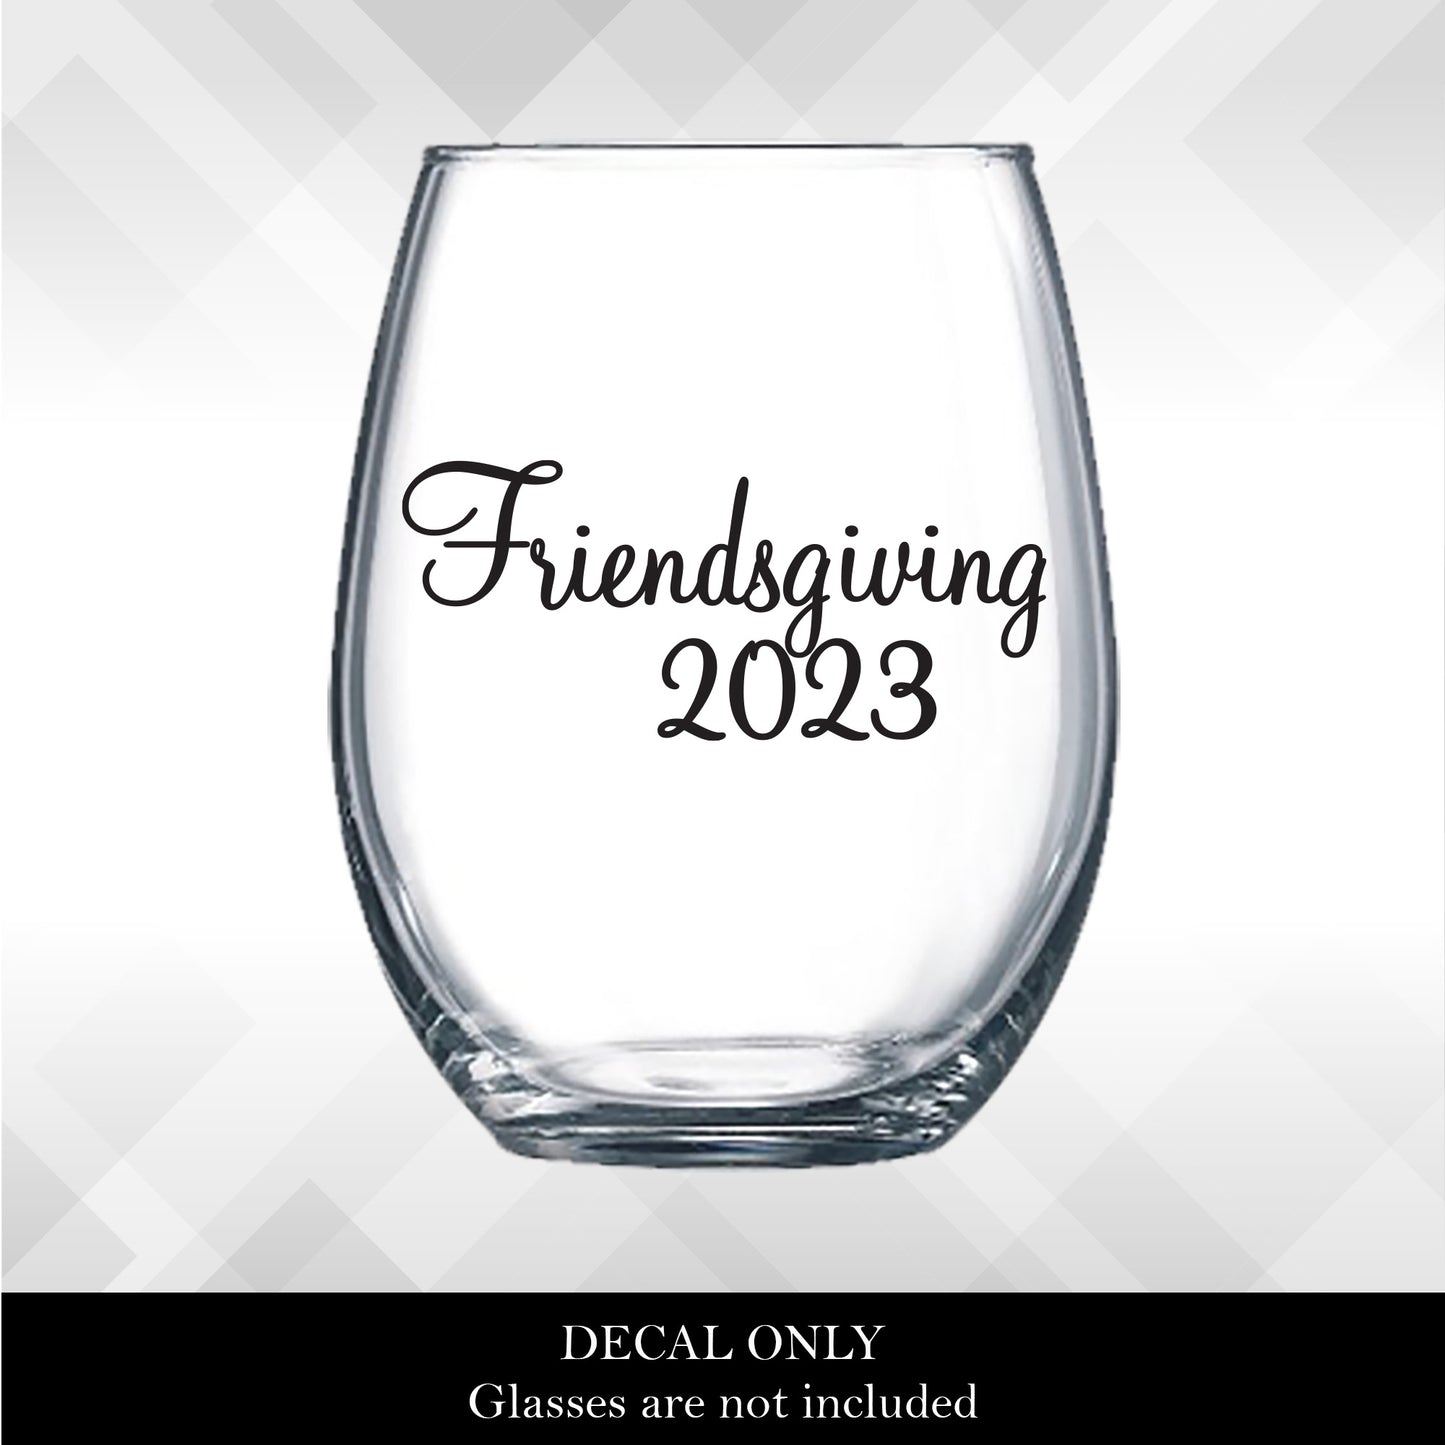 Friendsgiving Decals for Wine Glasses